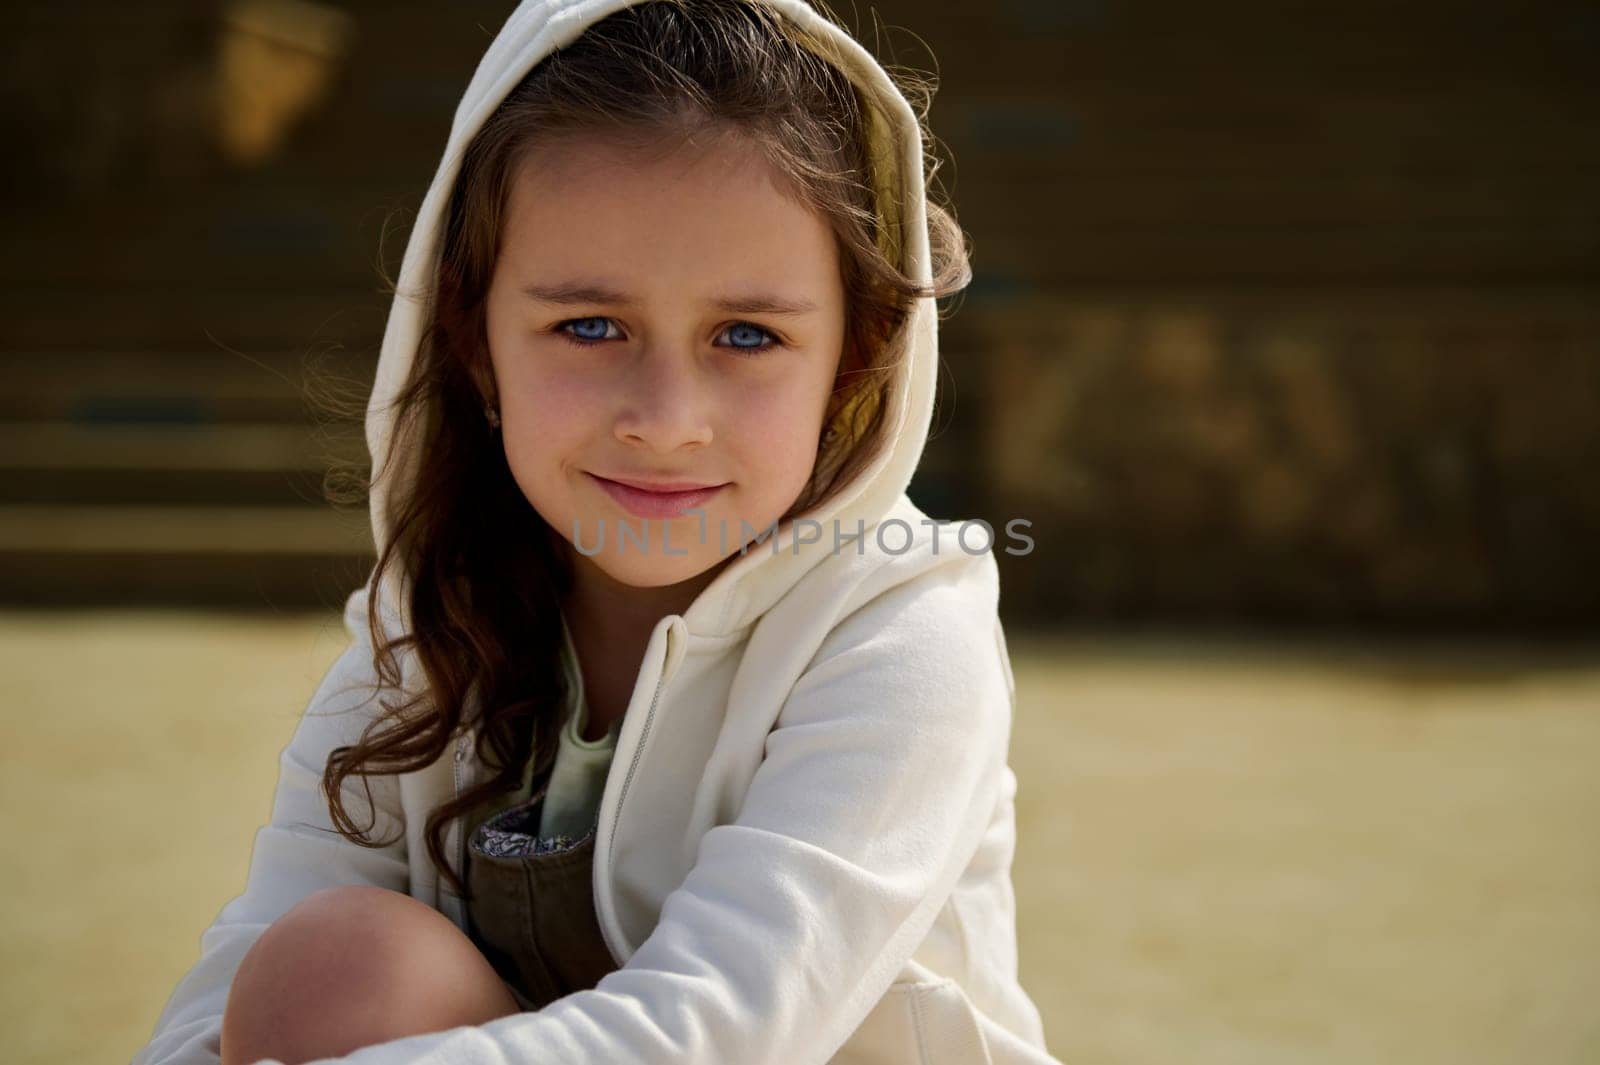 Close-up portrait adorable little child girl with blue eyes, wearing beige hoodie with a hood on her head, smiling looking confidently at camera, sitting on a skateboard in outdoor urban skatepark